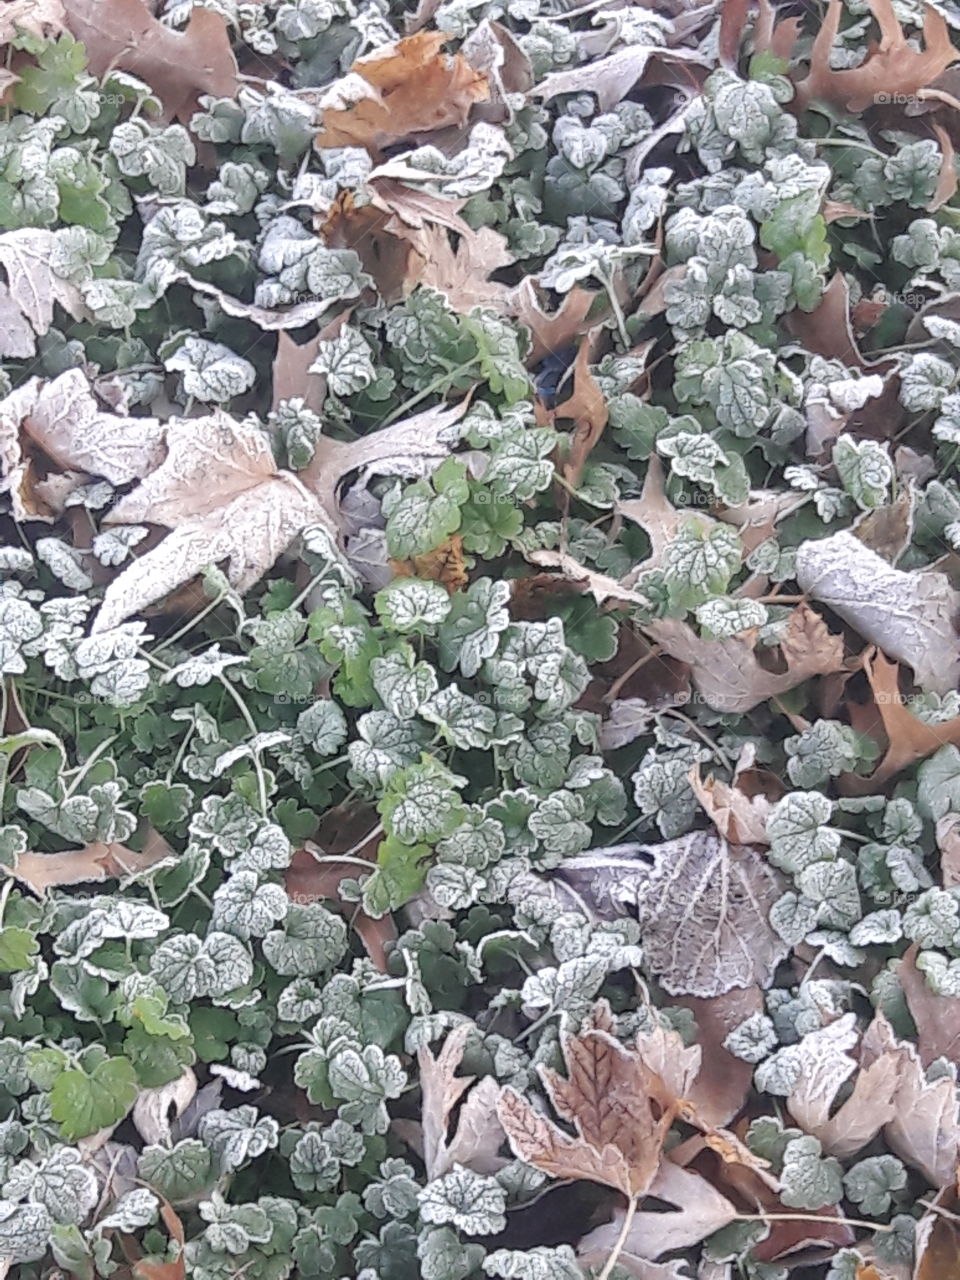 frost on the grass and leaves